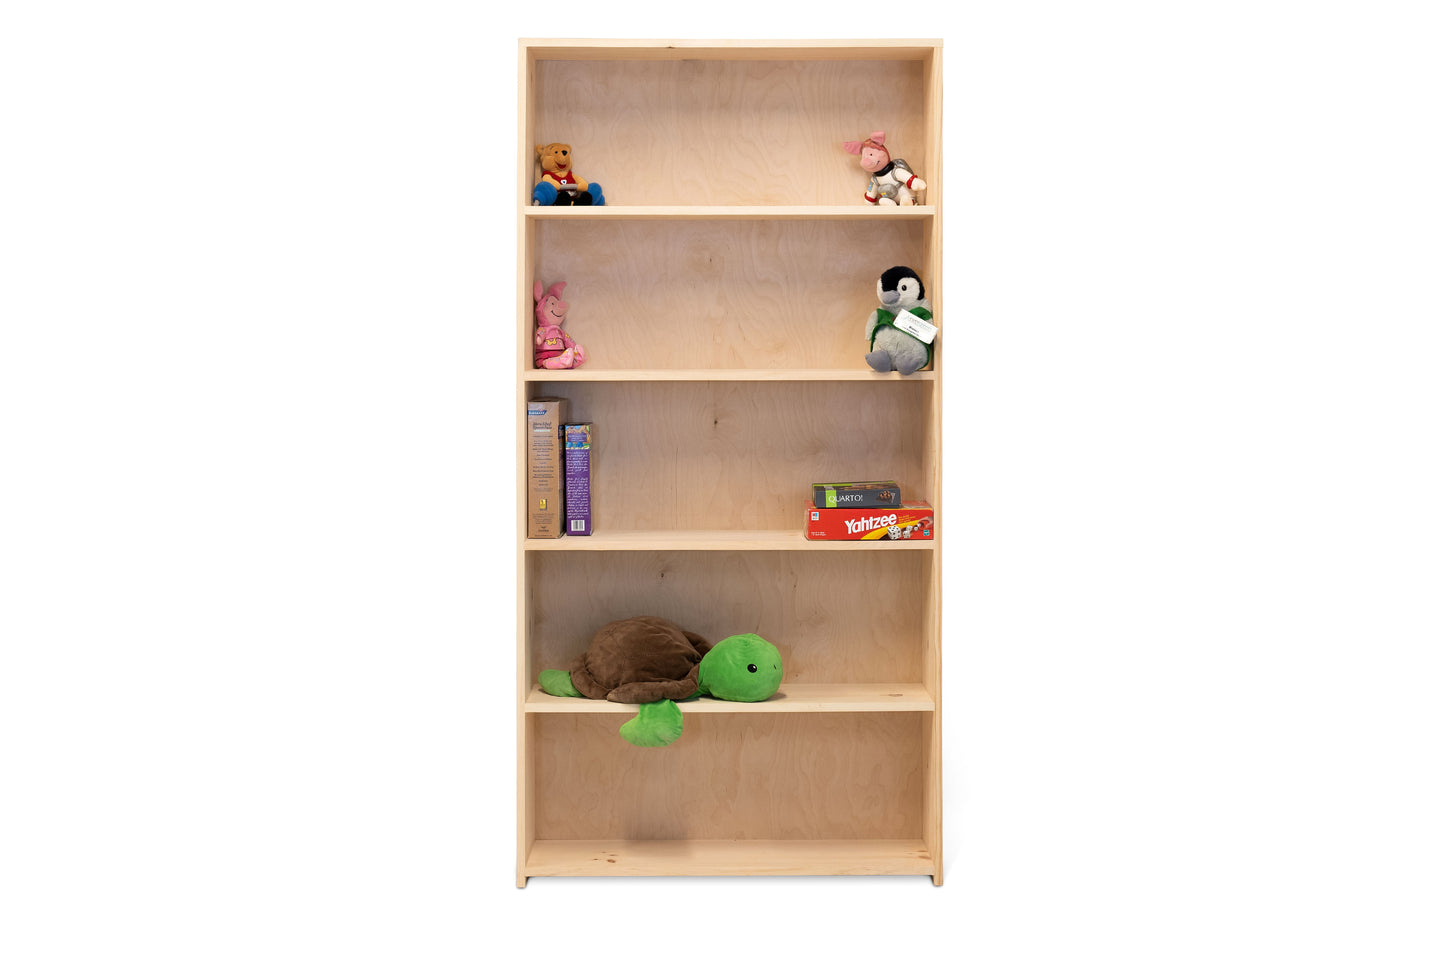 Evergreen Bookcase Shown unfinished and with items on the shelves.